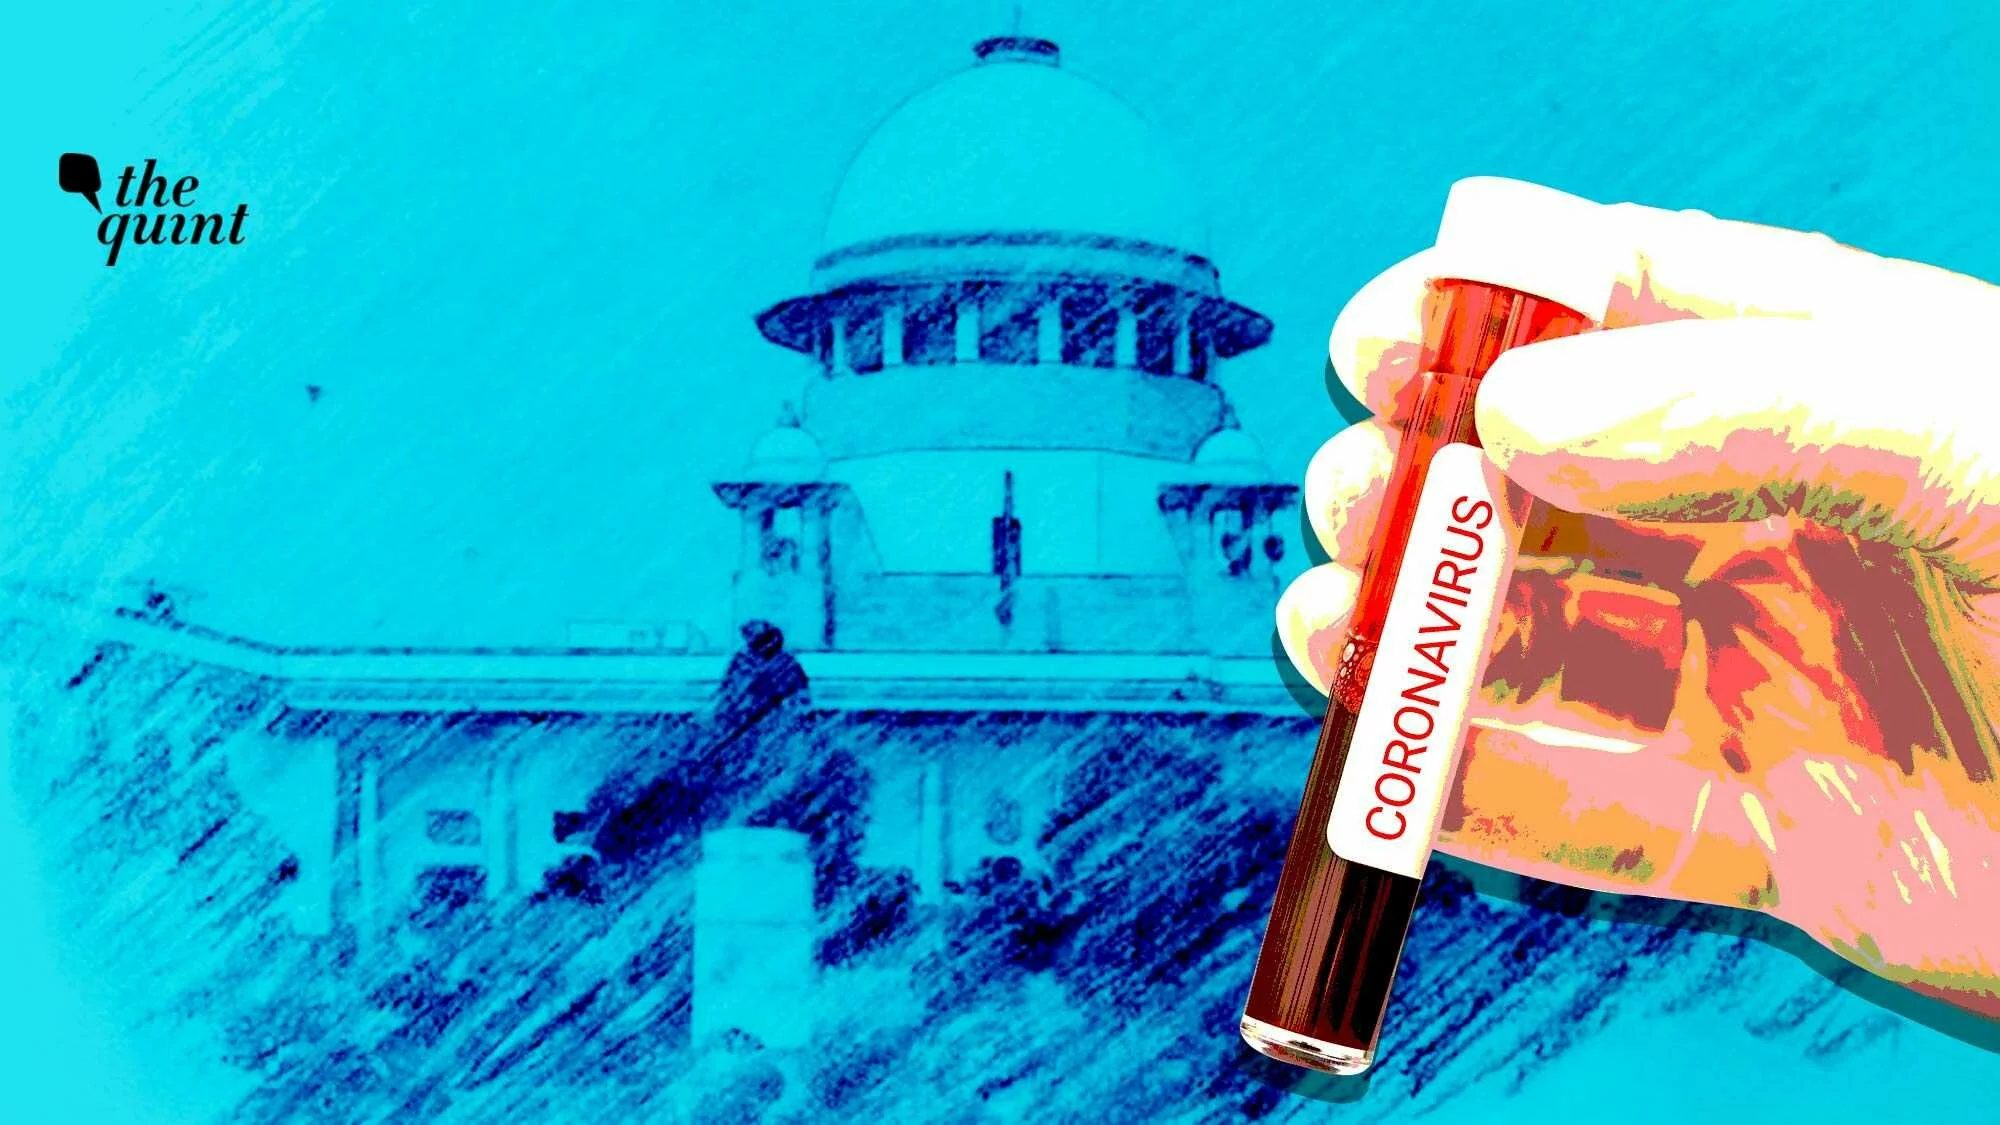 Ordering Free COVID Tests in Private Labs: Did SC Overstep Powers?